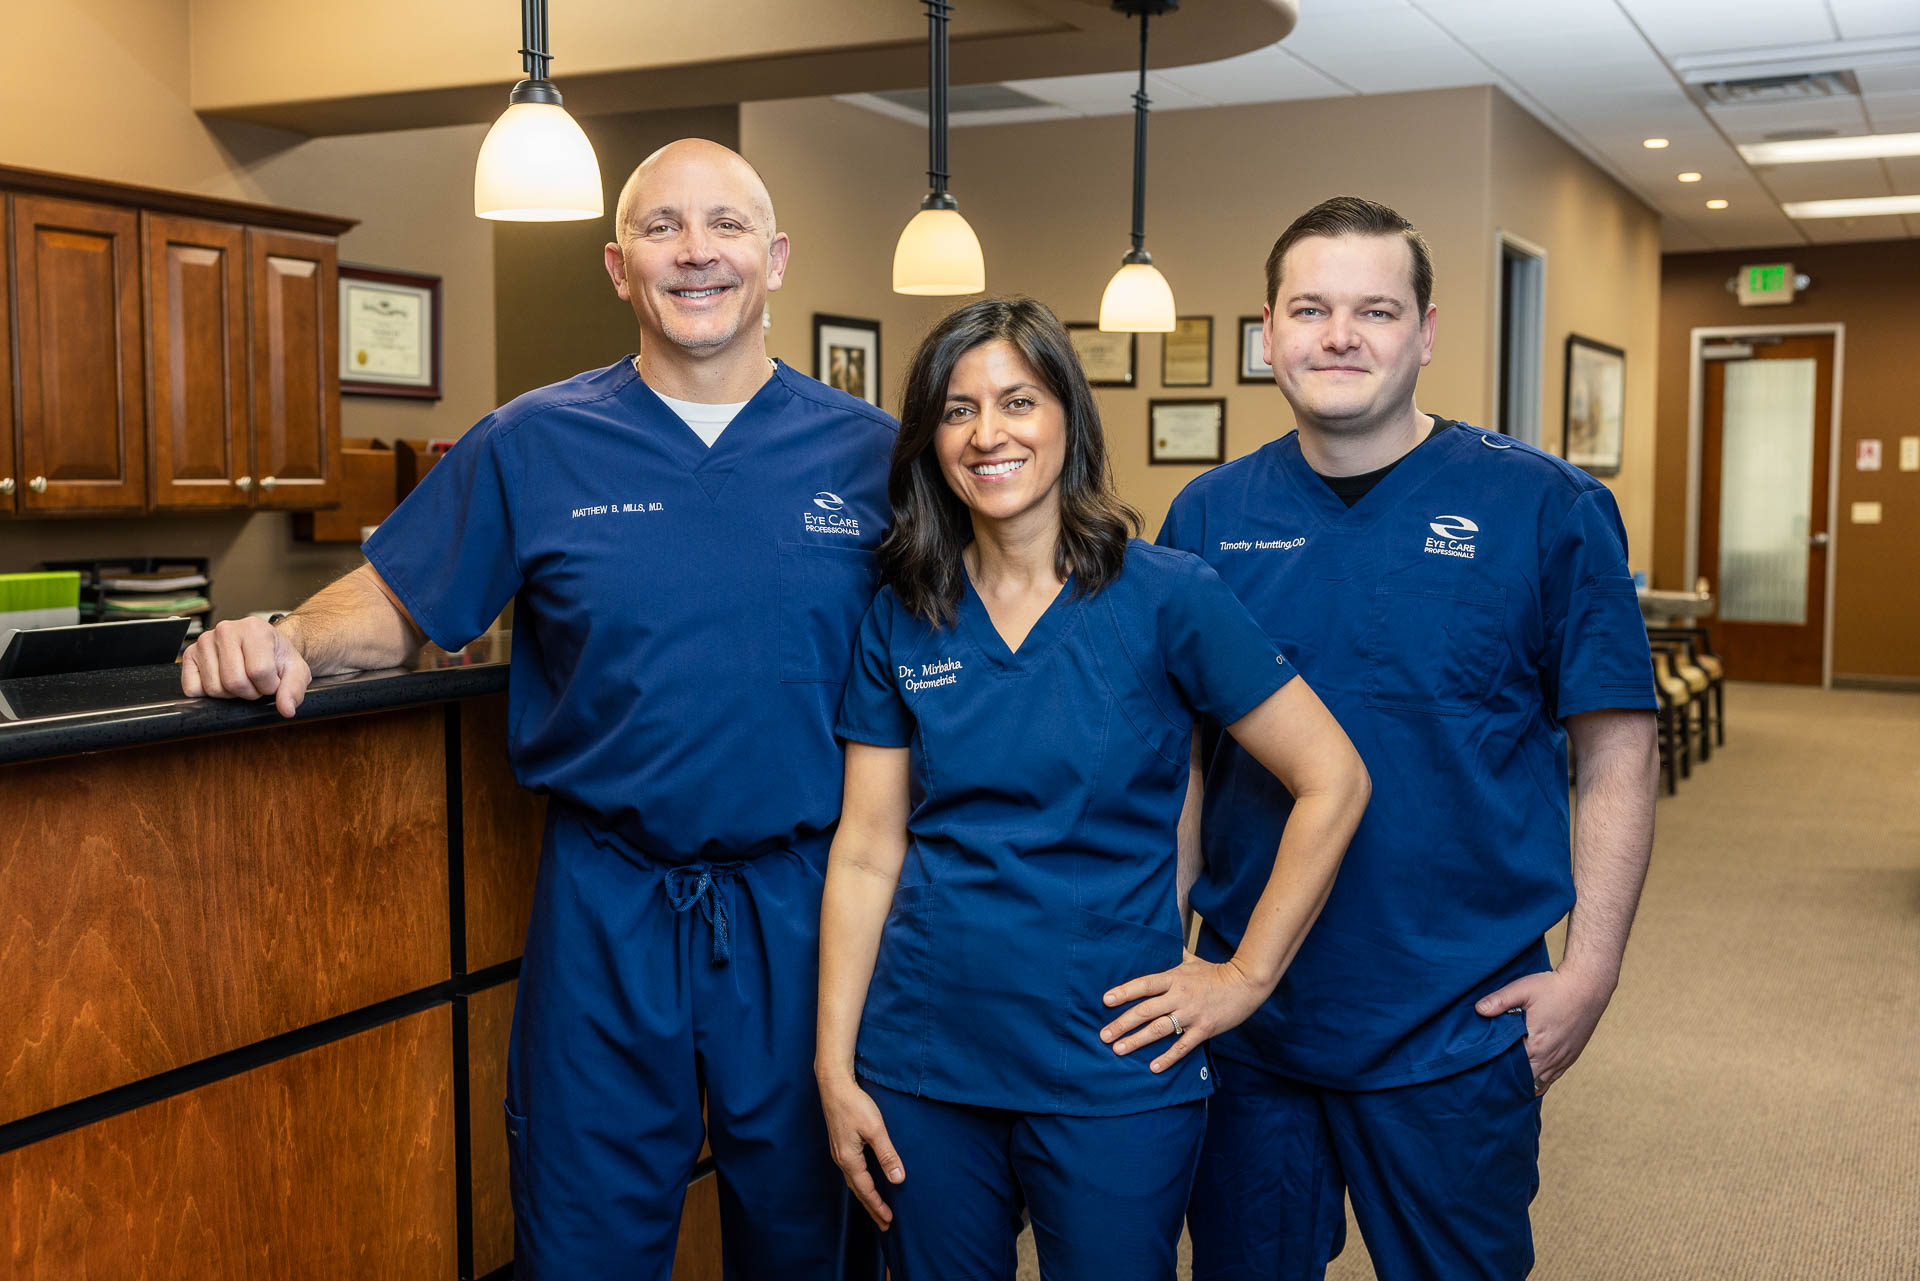 The Reno Eye Doctors at Eye Care Professionals